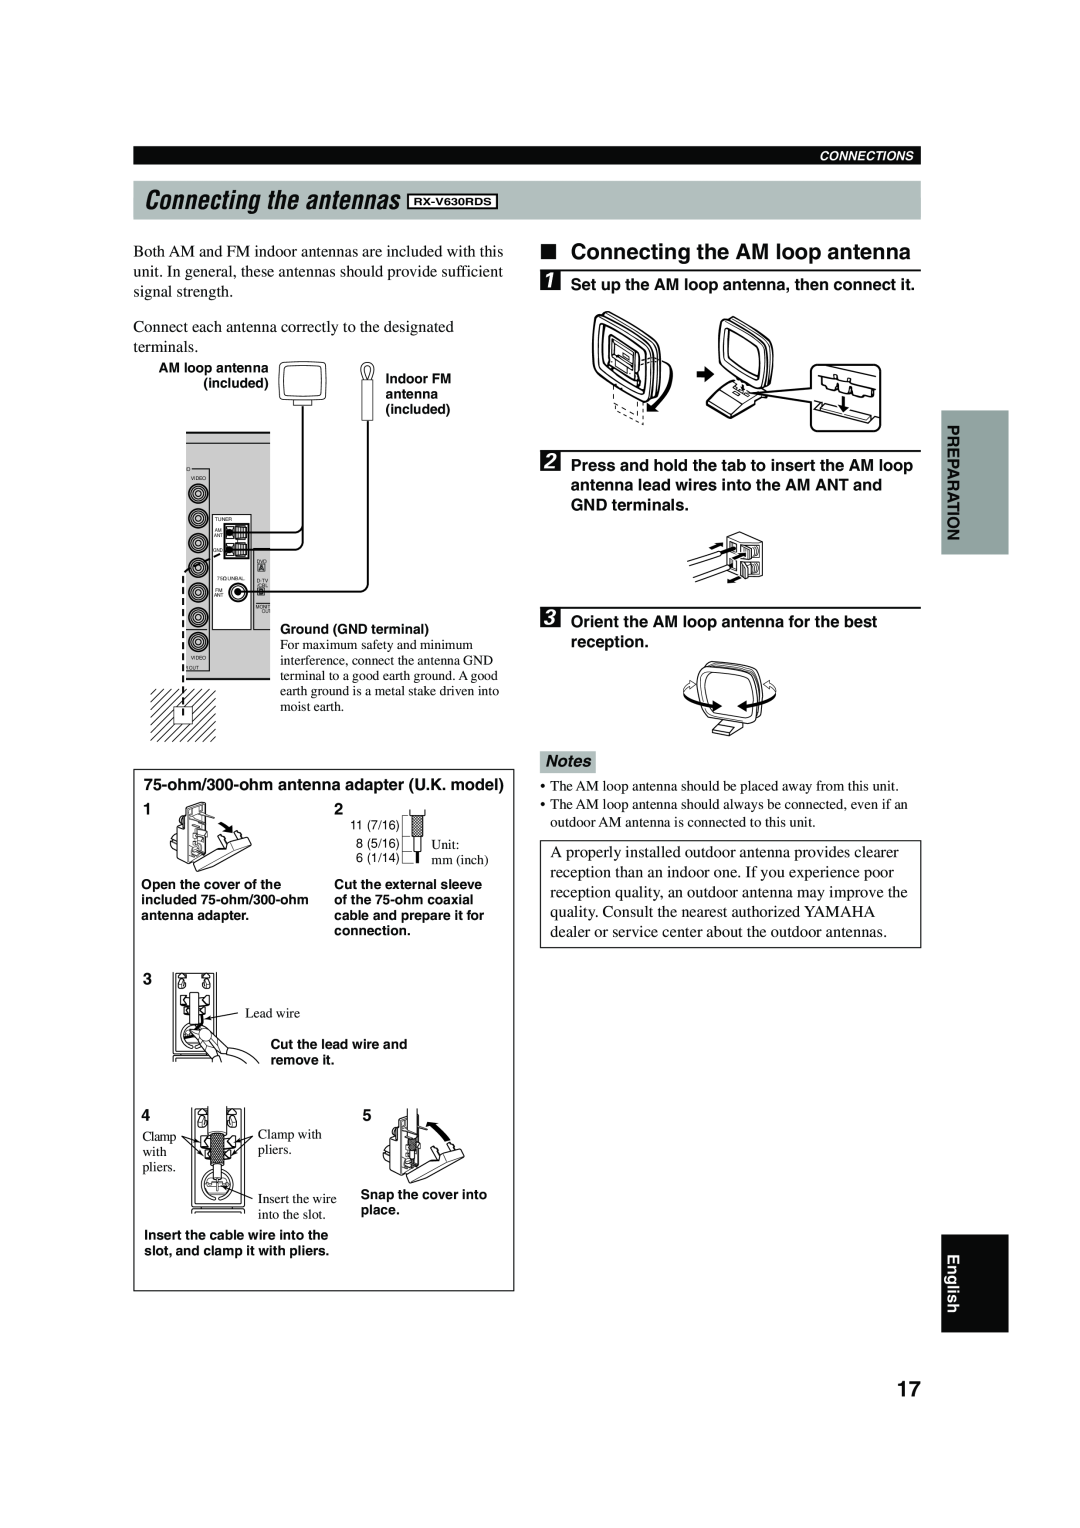 Yamaha owner manual Connecting the antennas RX-V630RDS, Connecting the AM loop antenna, Notes, English 